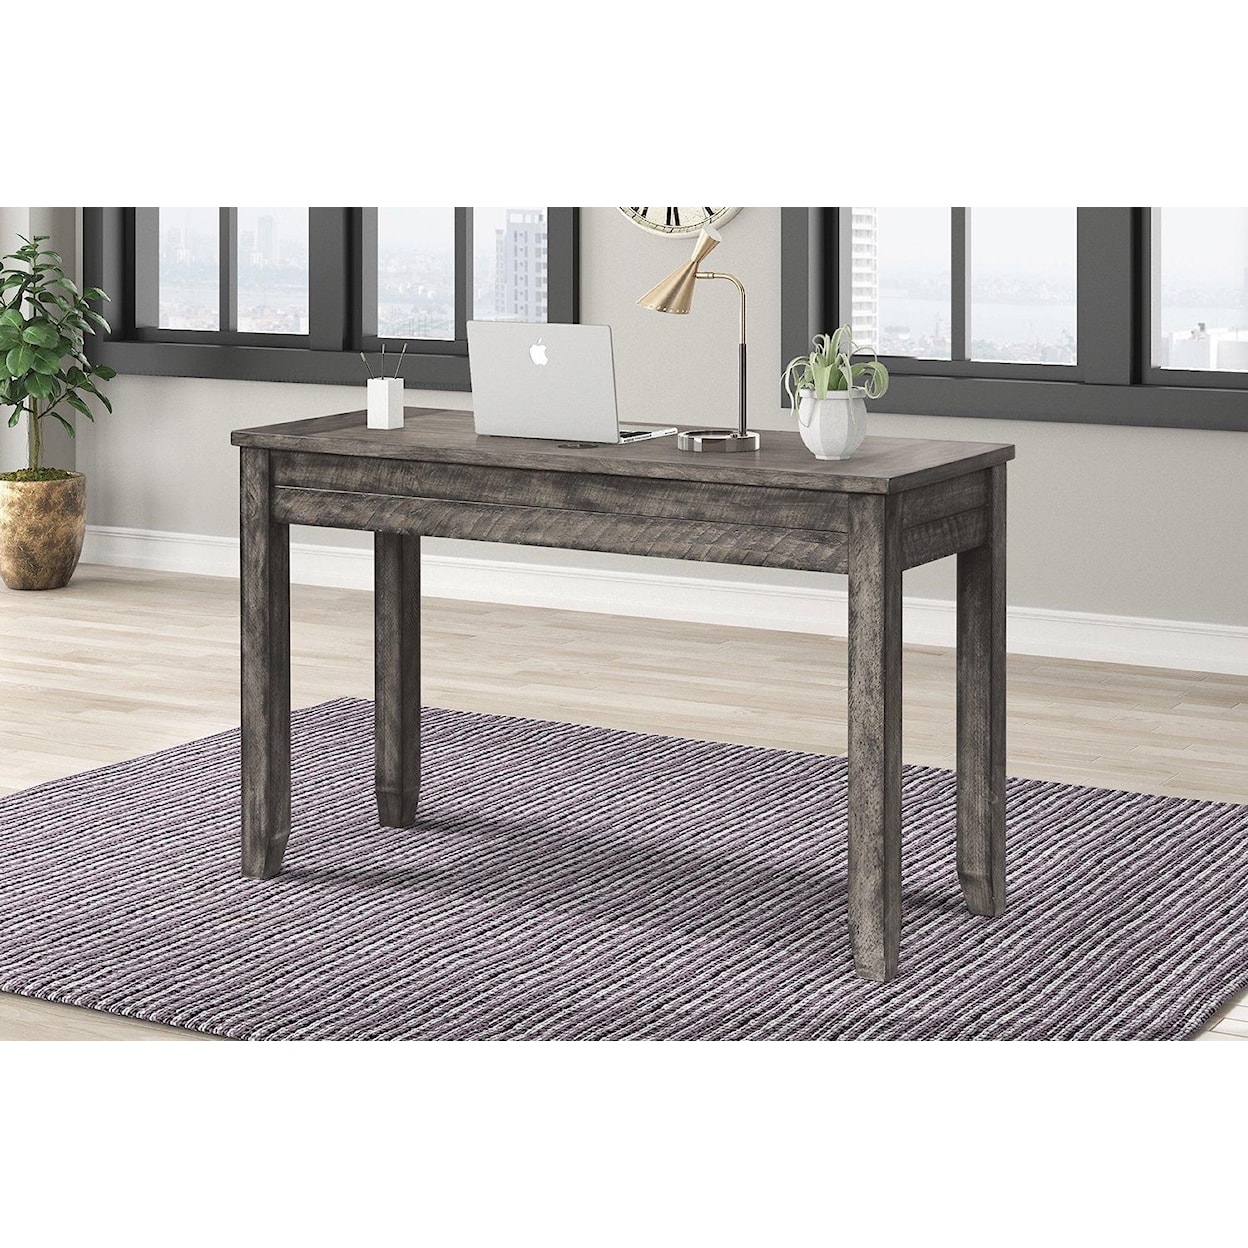 Parker Living Tempe GREY STONE 47 IN. WRITING DESK